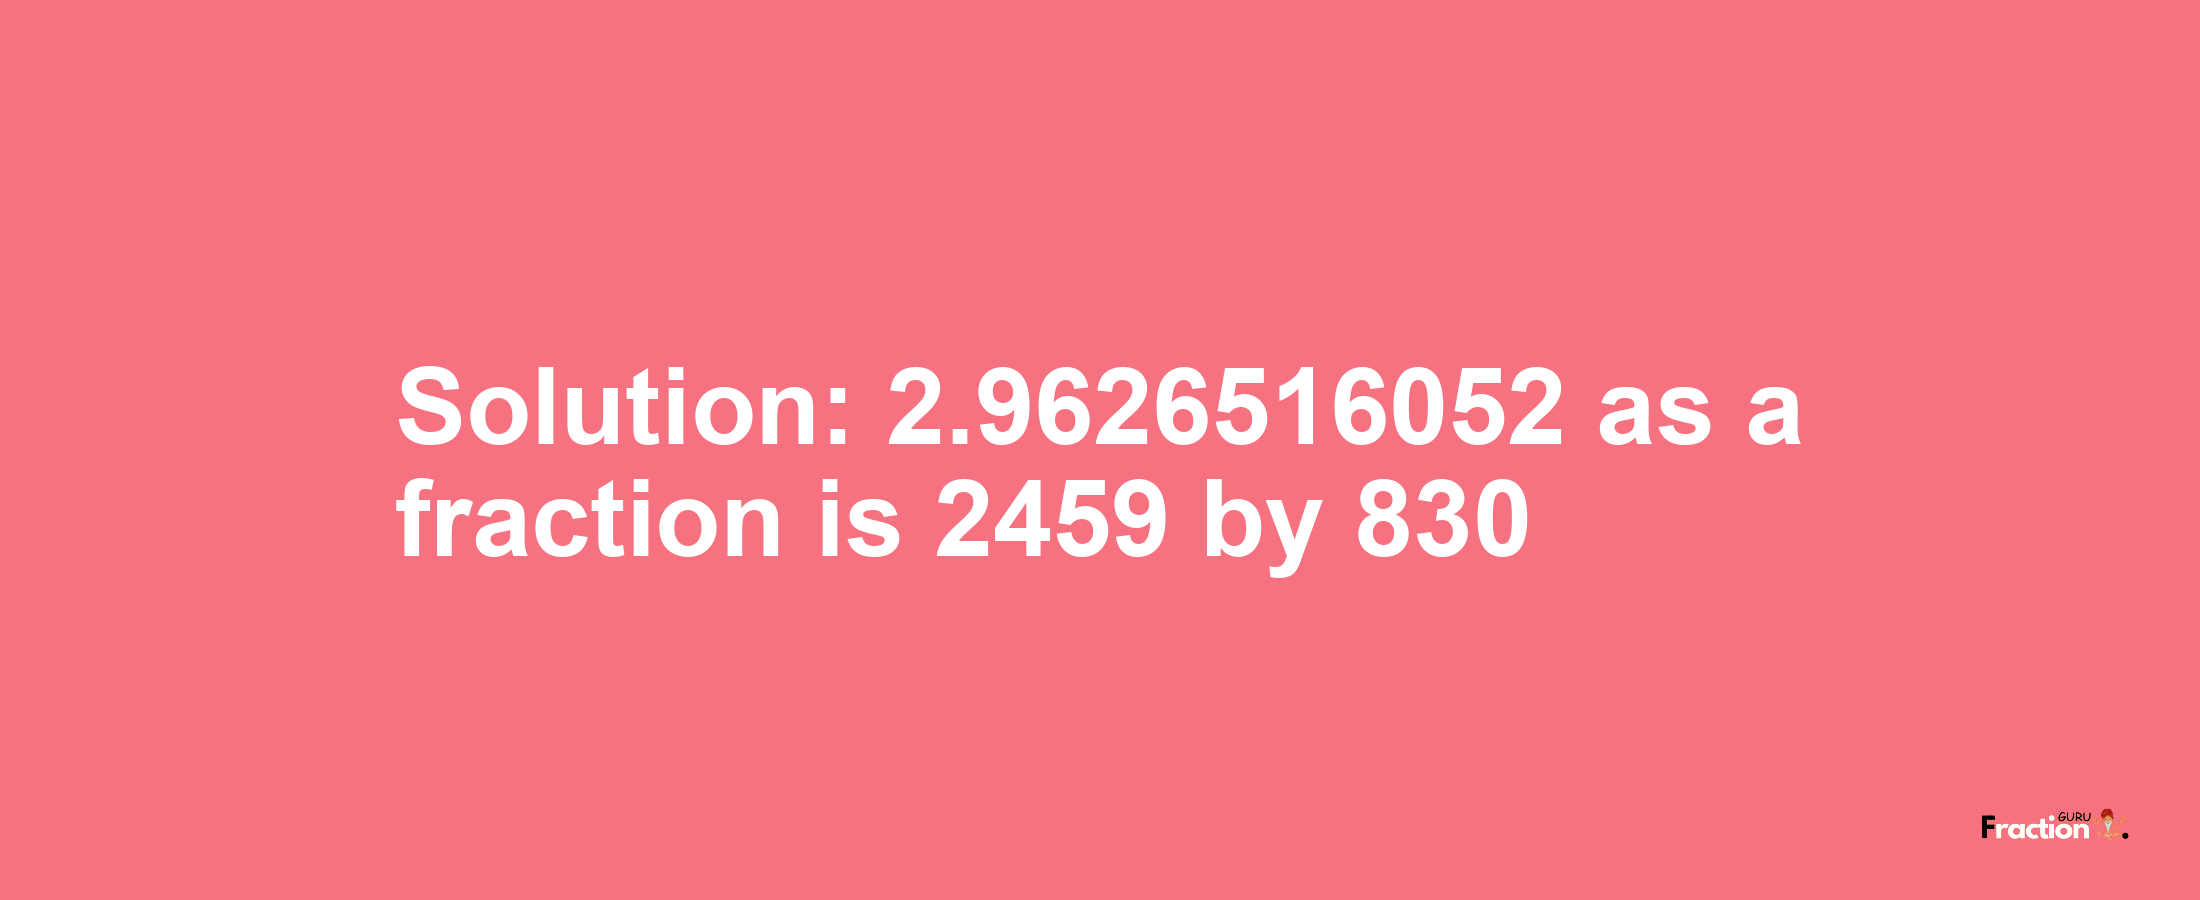 Solution:2.9626516052 as a fraction is 2459/830